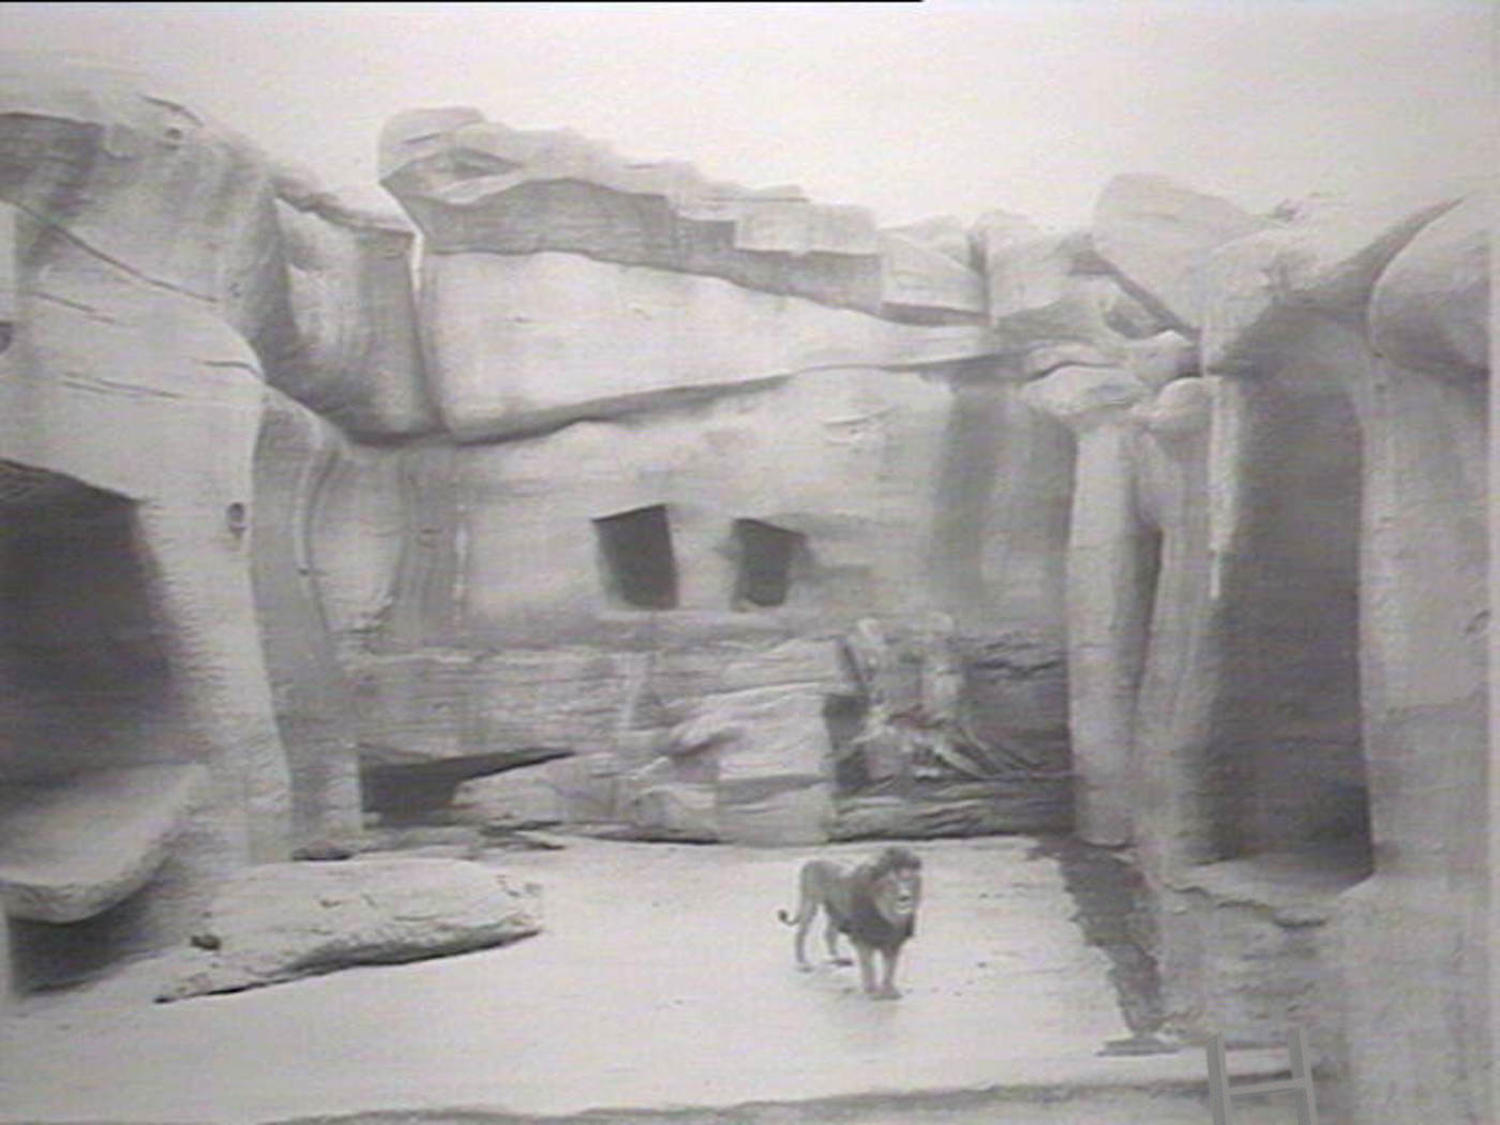 Archival image of a lion digitally altered to include a ladder